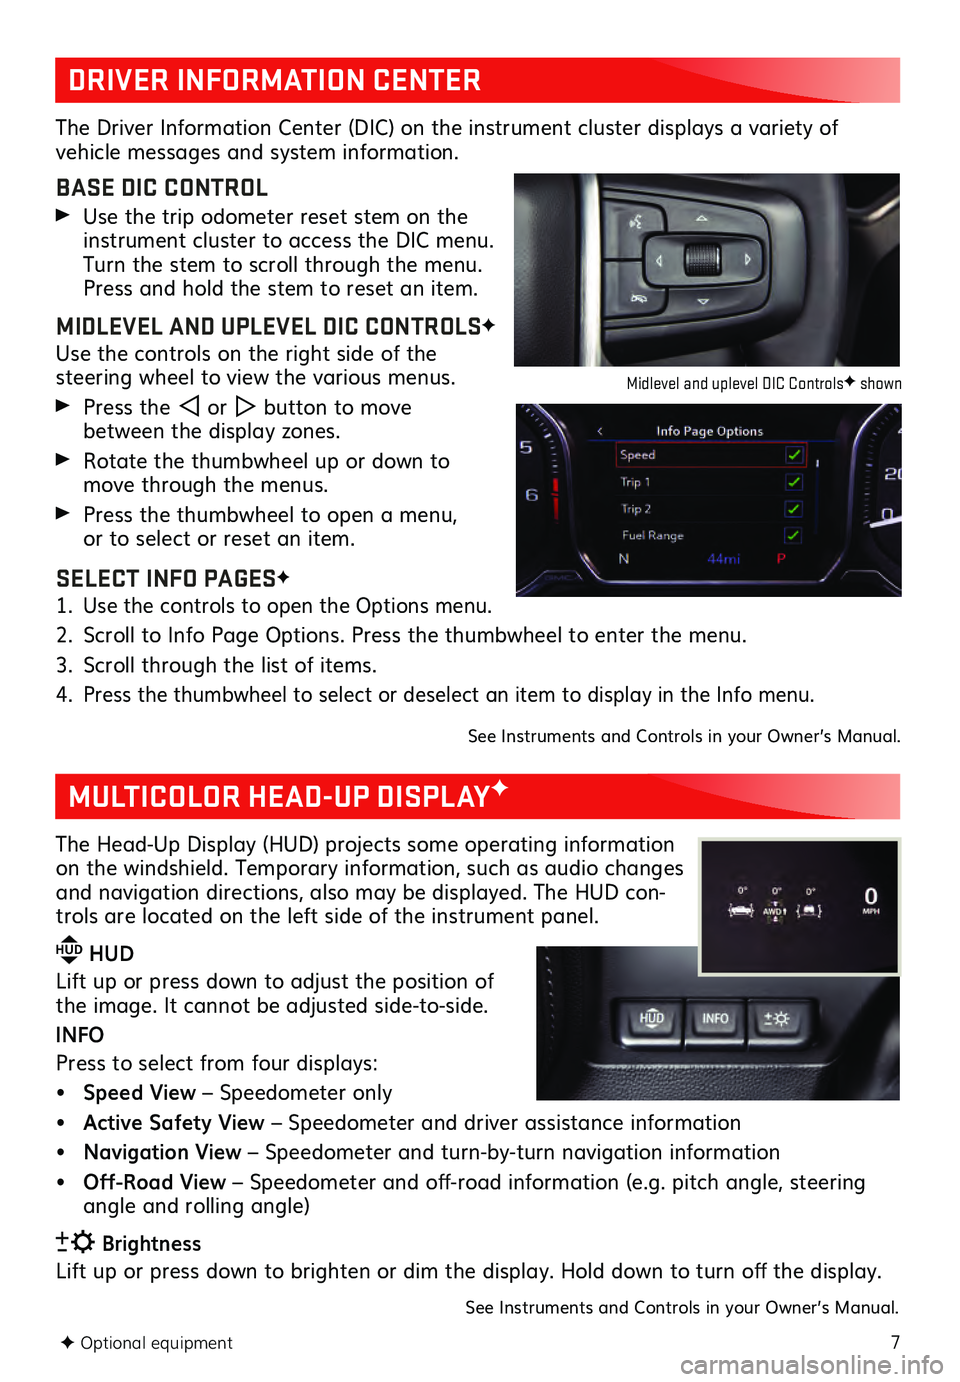 GMC SIERRA 2021  Get To Know Guide 7F Optional equipment  
DRIVER INFORMATION CENTER
MULTICOLOR HEAD-UP DISPLAYF
The Driver Information Center (DIC) on the instrument cluster displays a variety of  vehicle messages and system informati